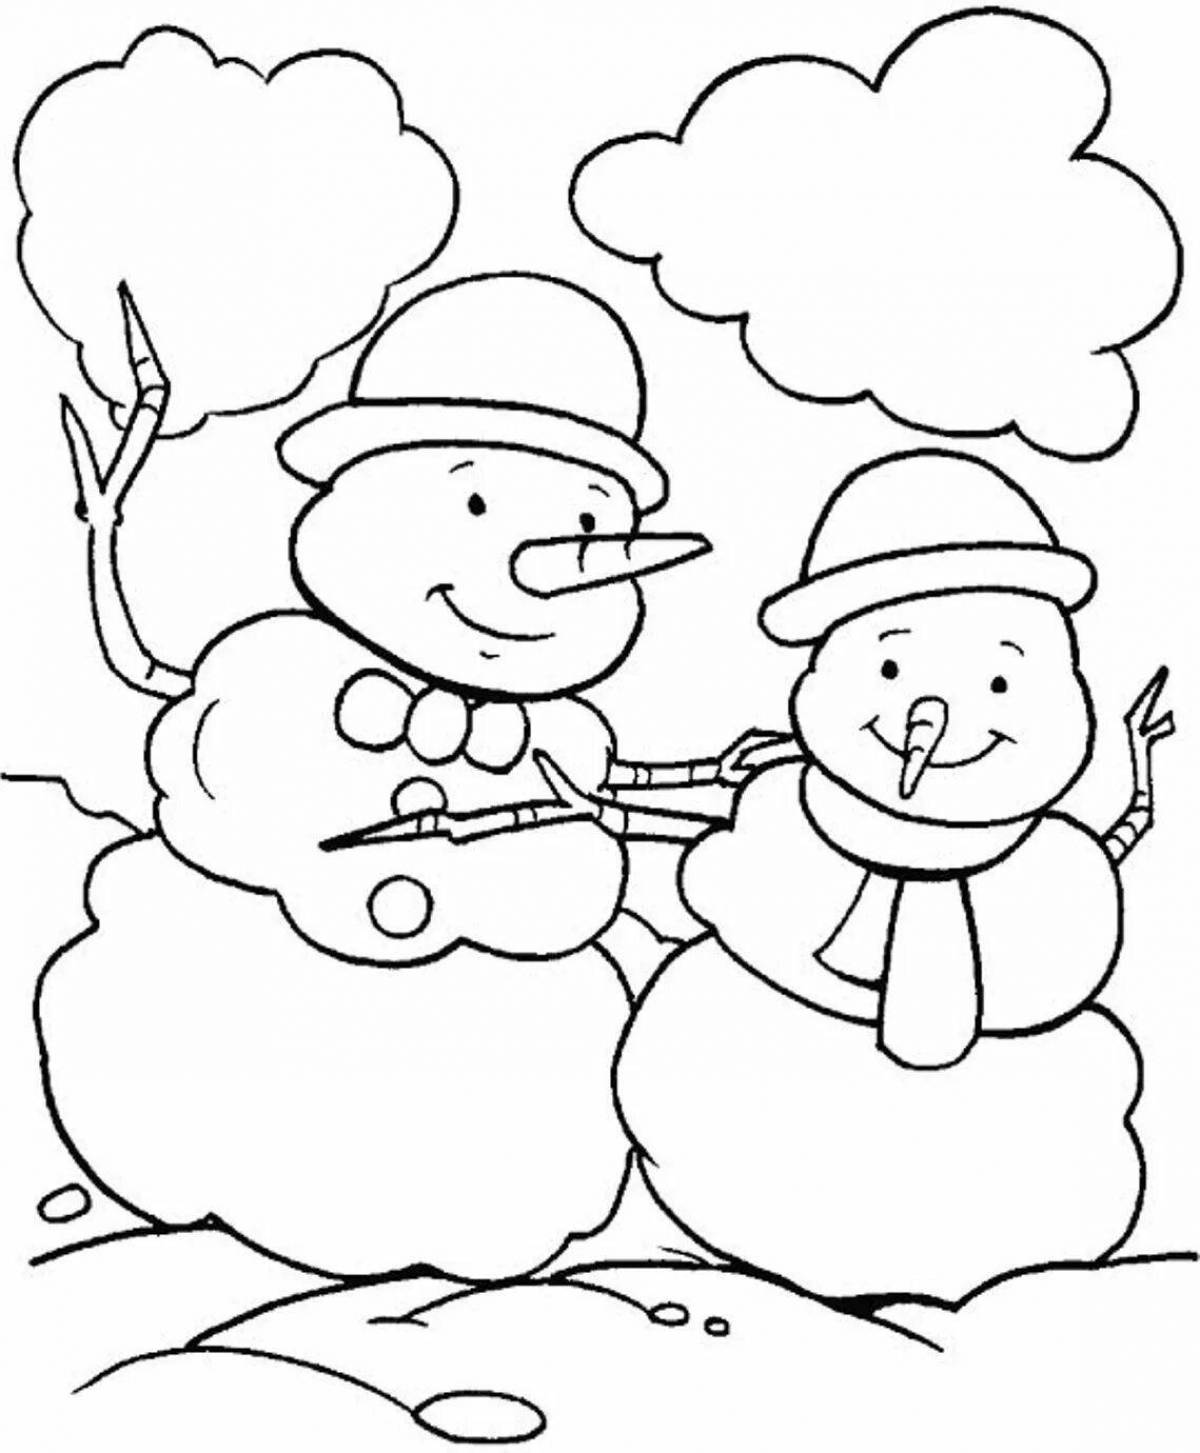 Witty snowman coloring page